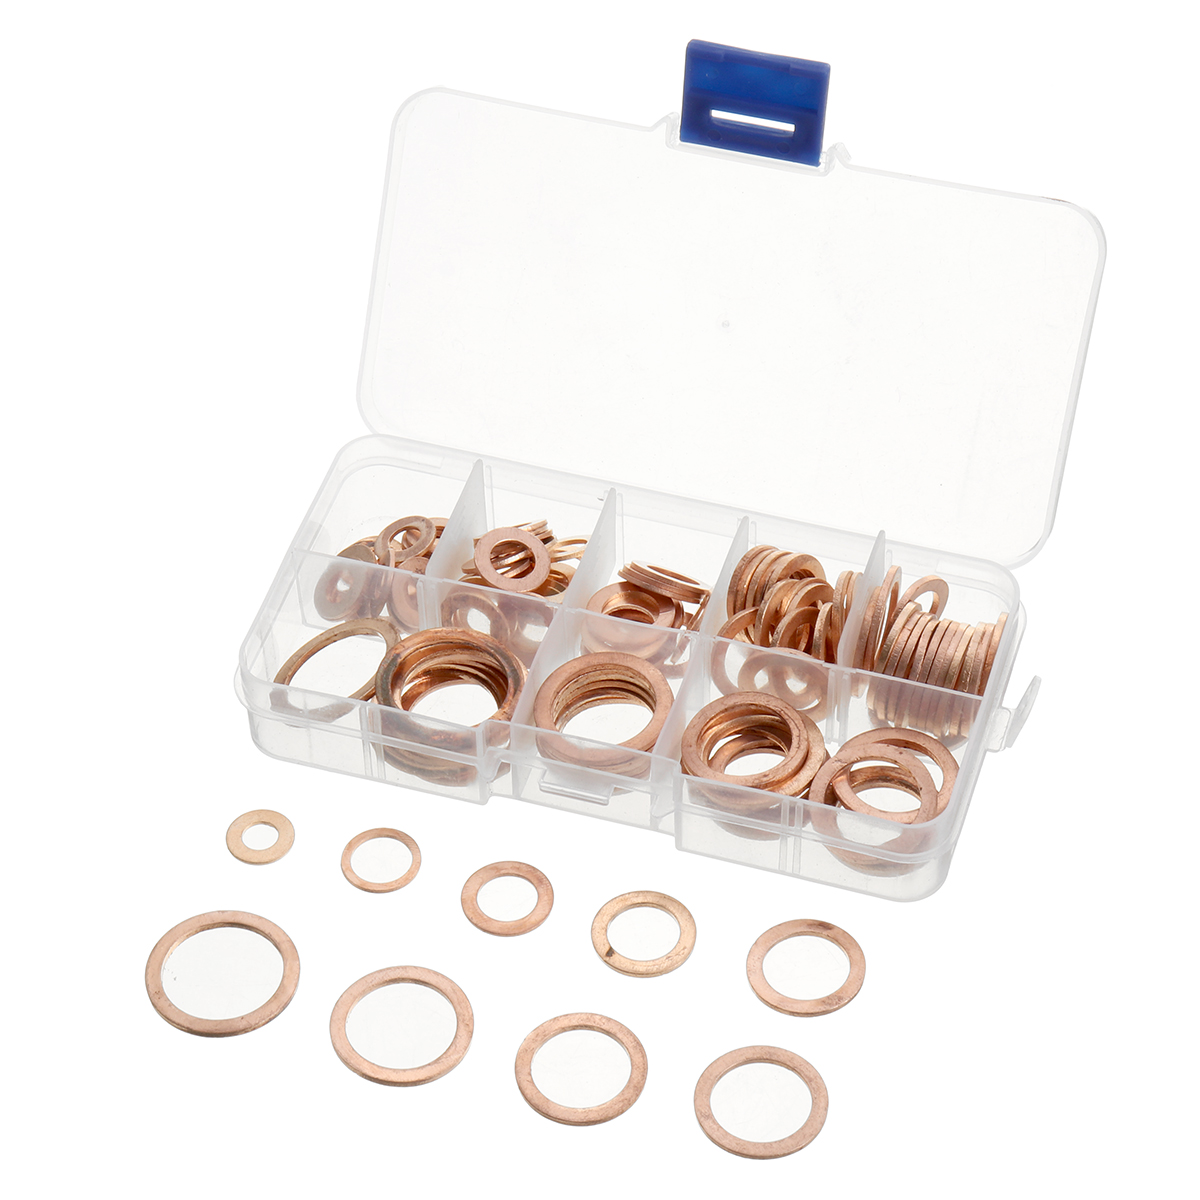 100Pcs-Assorted-Copper-Sealing-Solid-Gasket-Washer-Sump-Plug-Oil-For-Boat-Crush-Flat-Seal-Ring-Tool--1809755-2